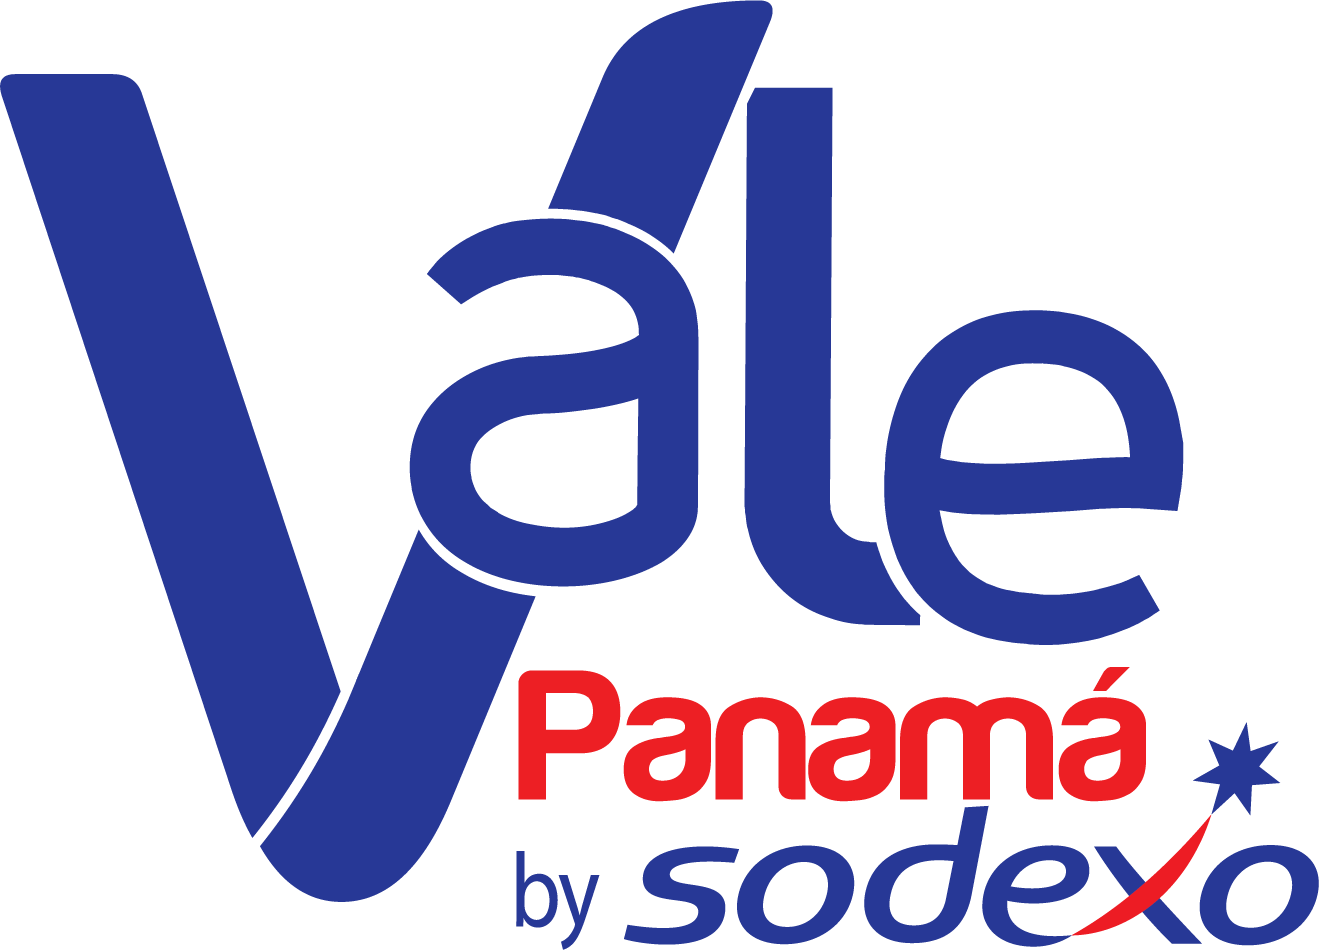 LOGO VALE PANAMA by sodexo.png